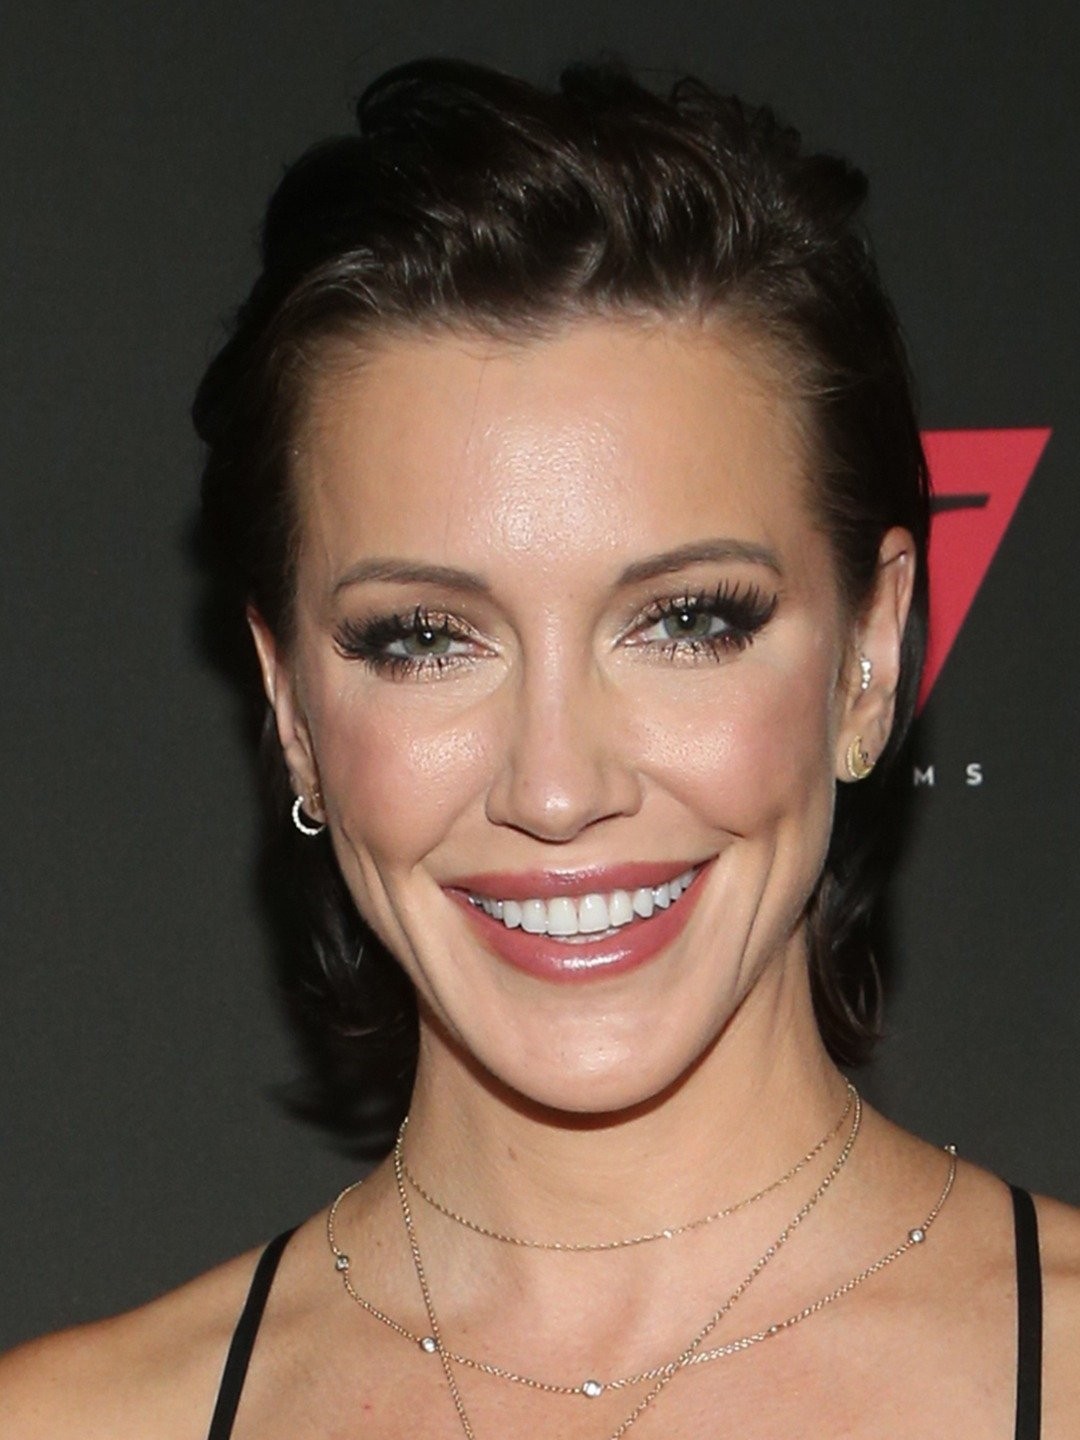 dawn vaneffen recommends katie cassidy sex video pic